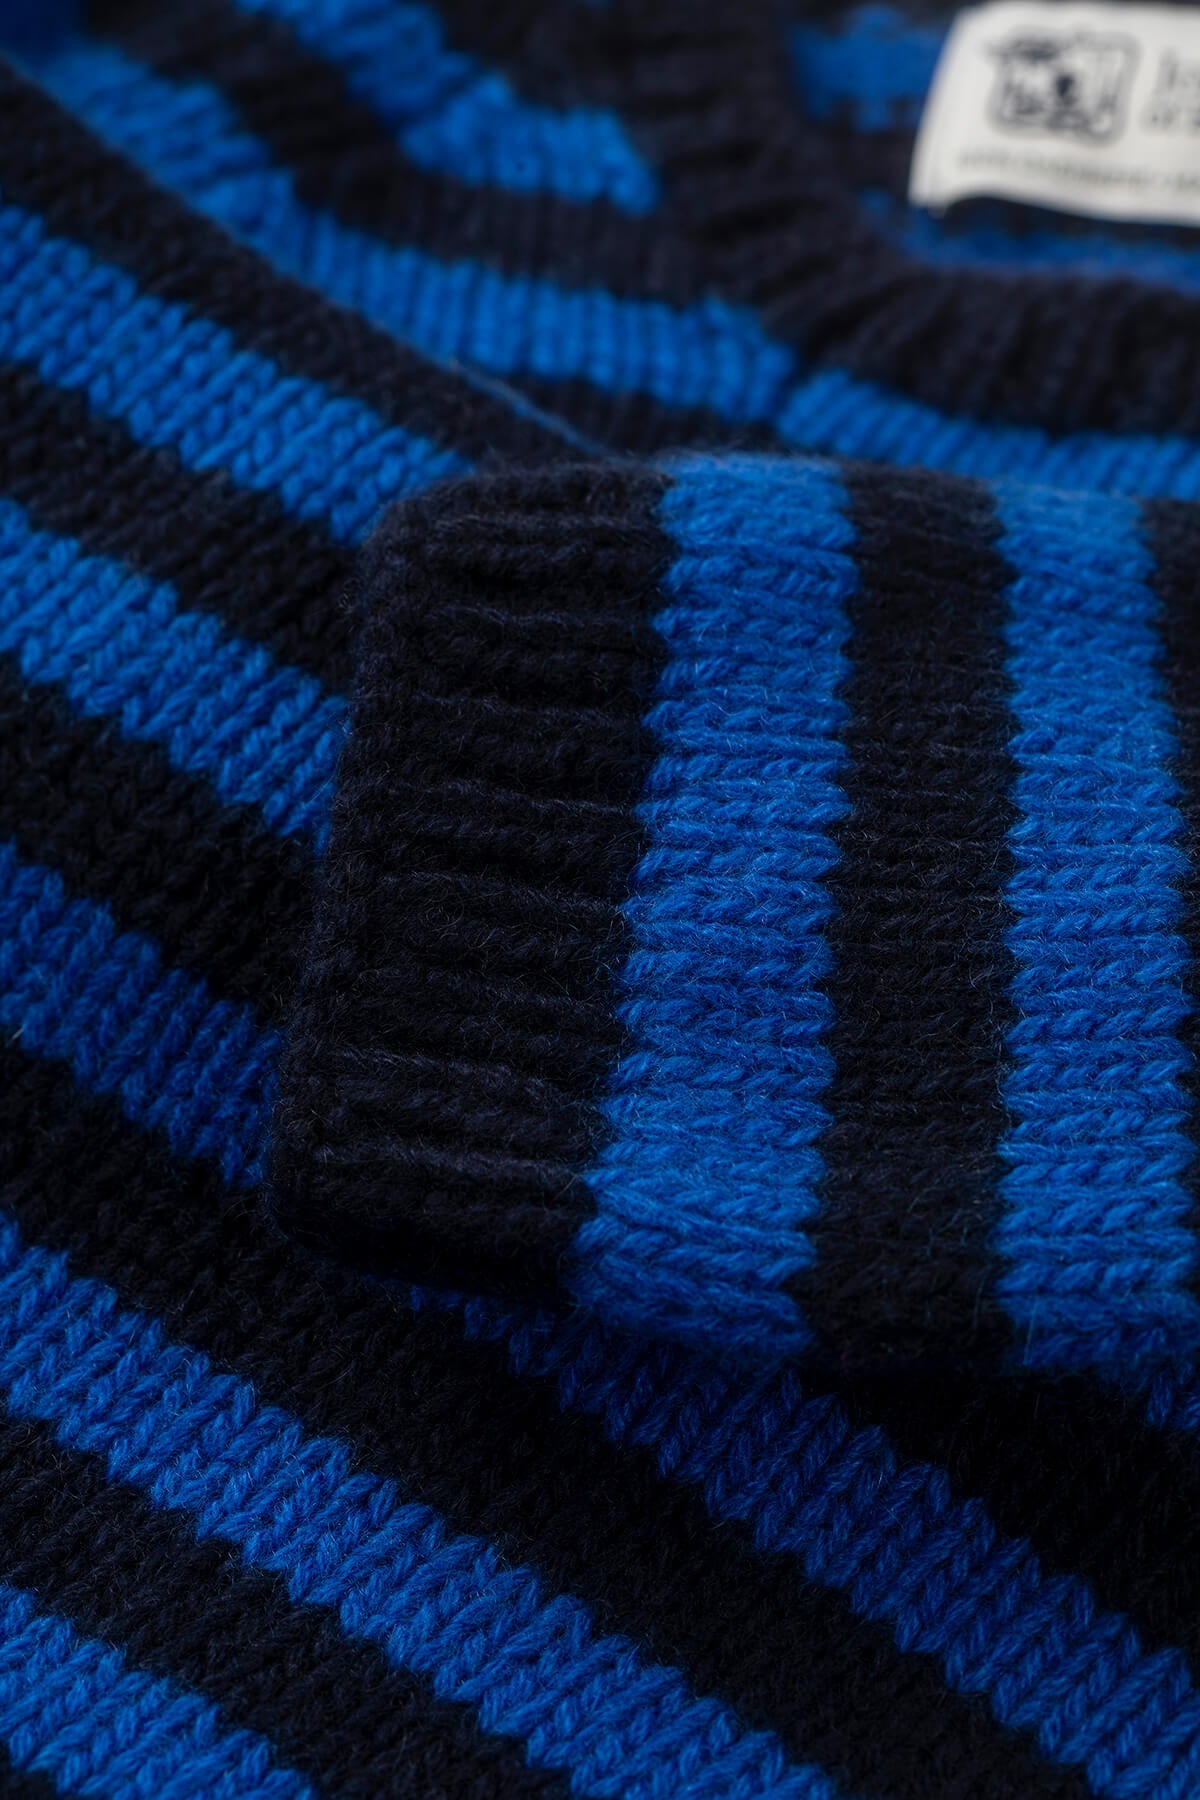 Details on a Johnstons of Elgin Stripy Hand Knitted Children's Cashmere Jumper in Navy & Bright Blue 76199ZZZ107